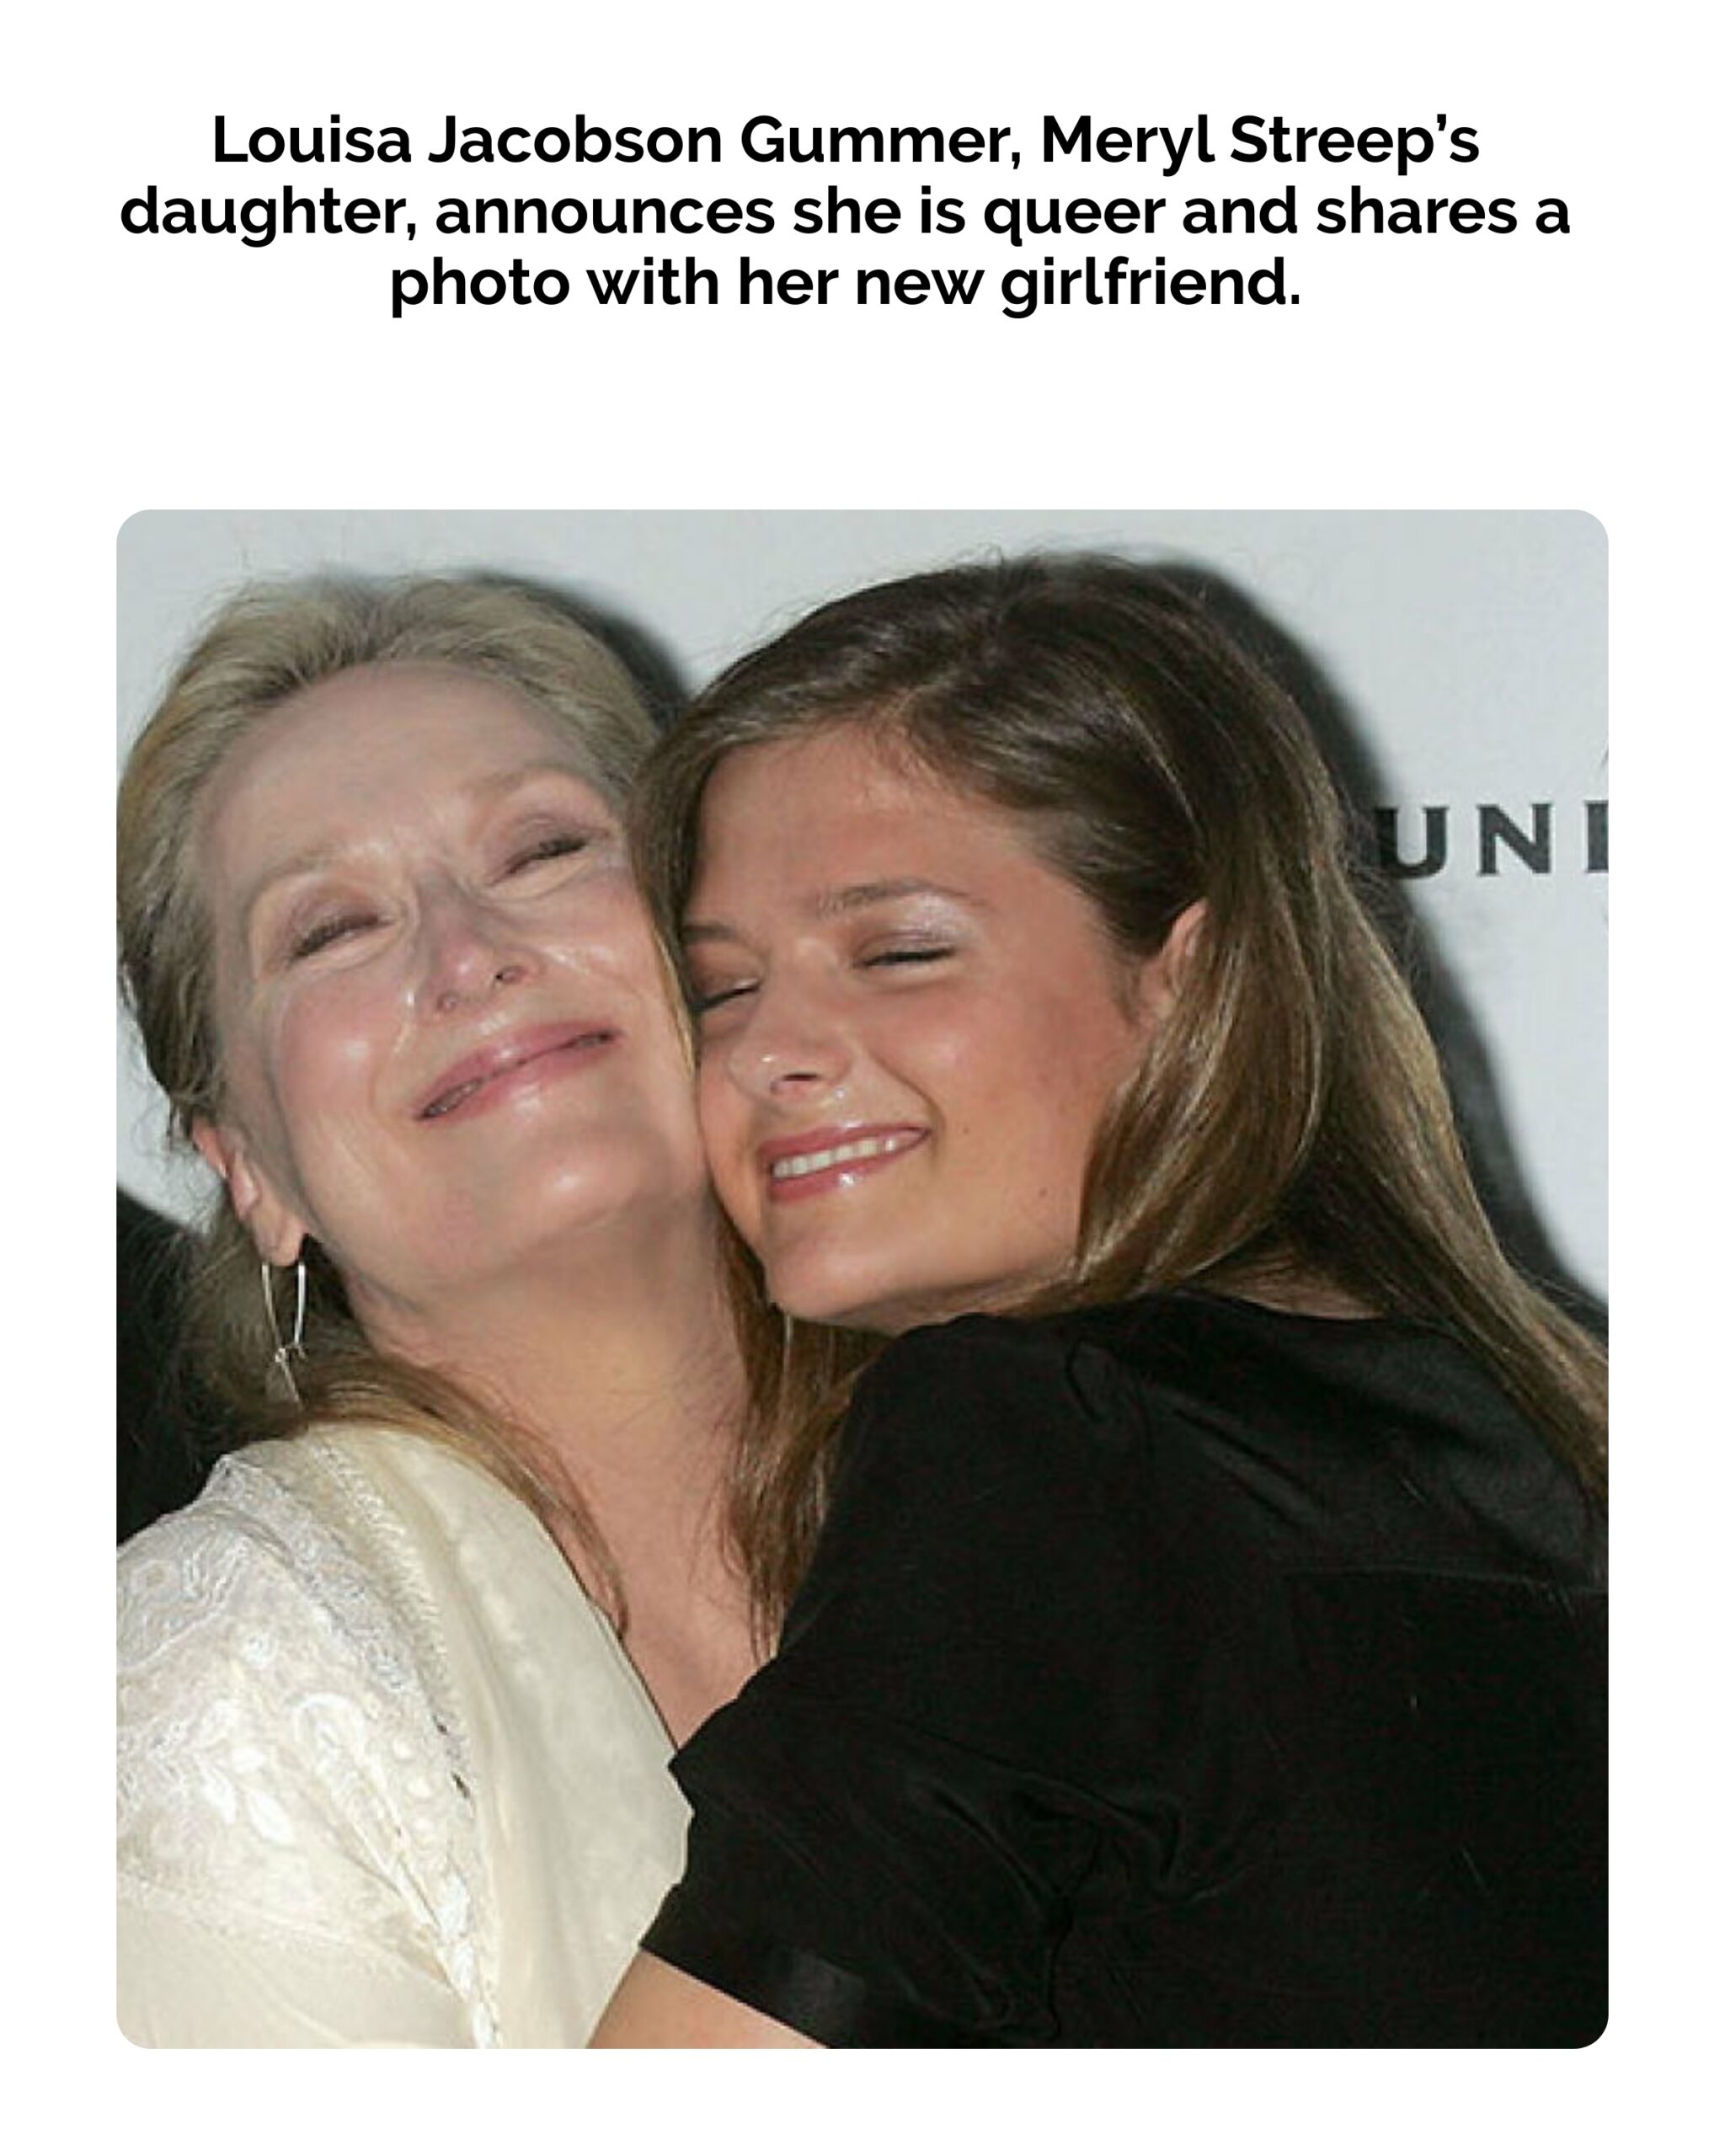 Meryl Streep’s Daughter Louisa Jacobson Gummer Comes Out As Queer, Introduces New Girlfriend